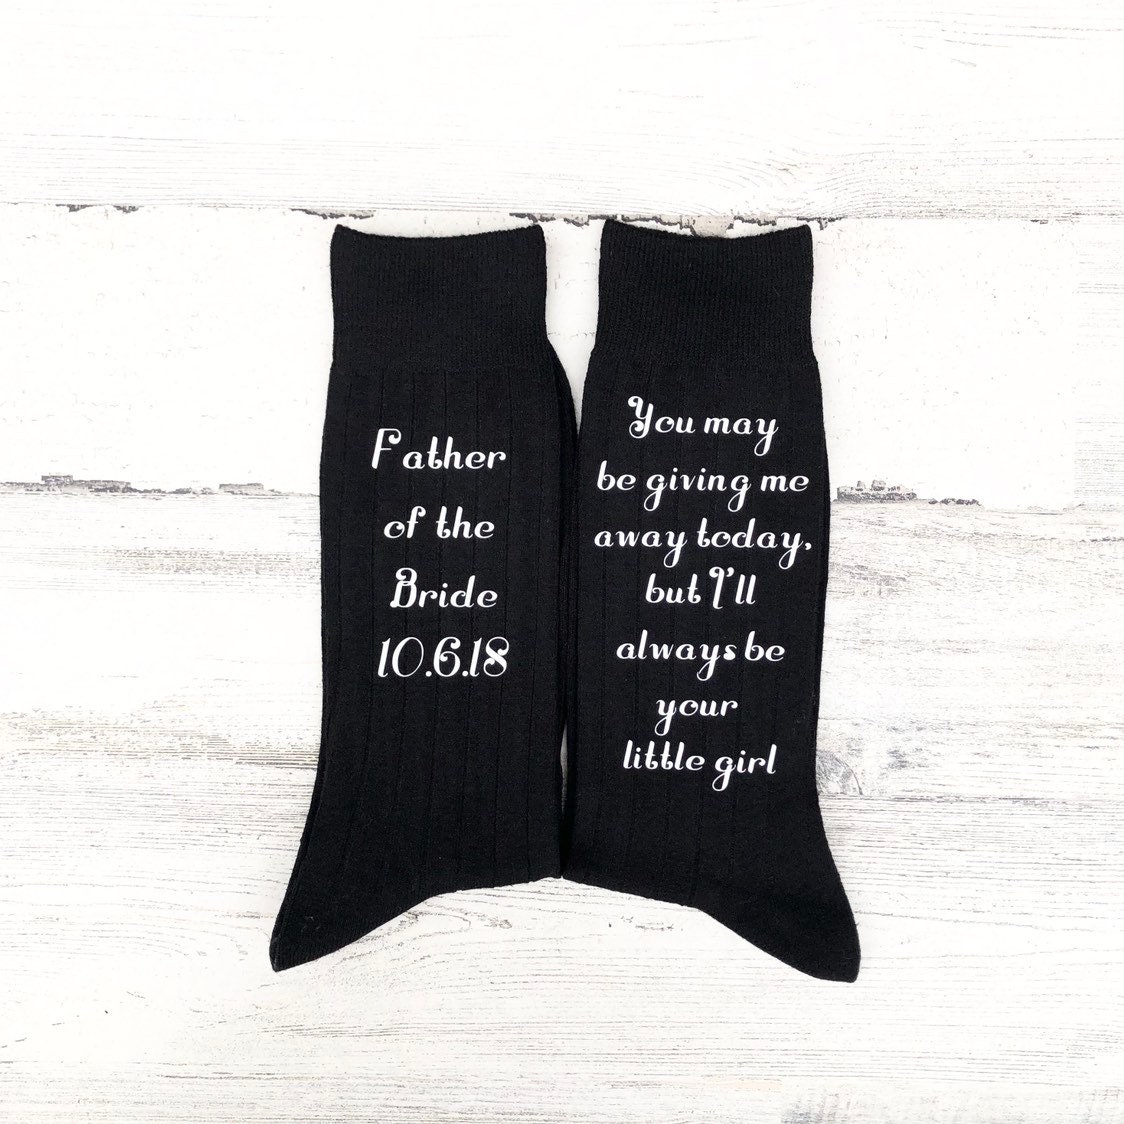 Father of the Bride Socks - Always be your little girl - Special socks ...